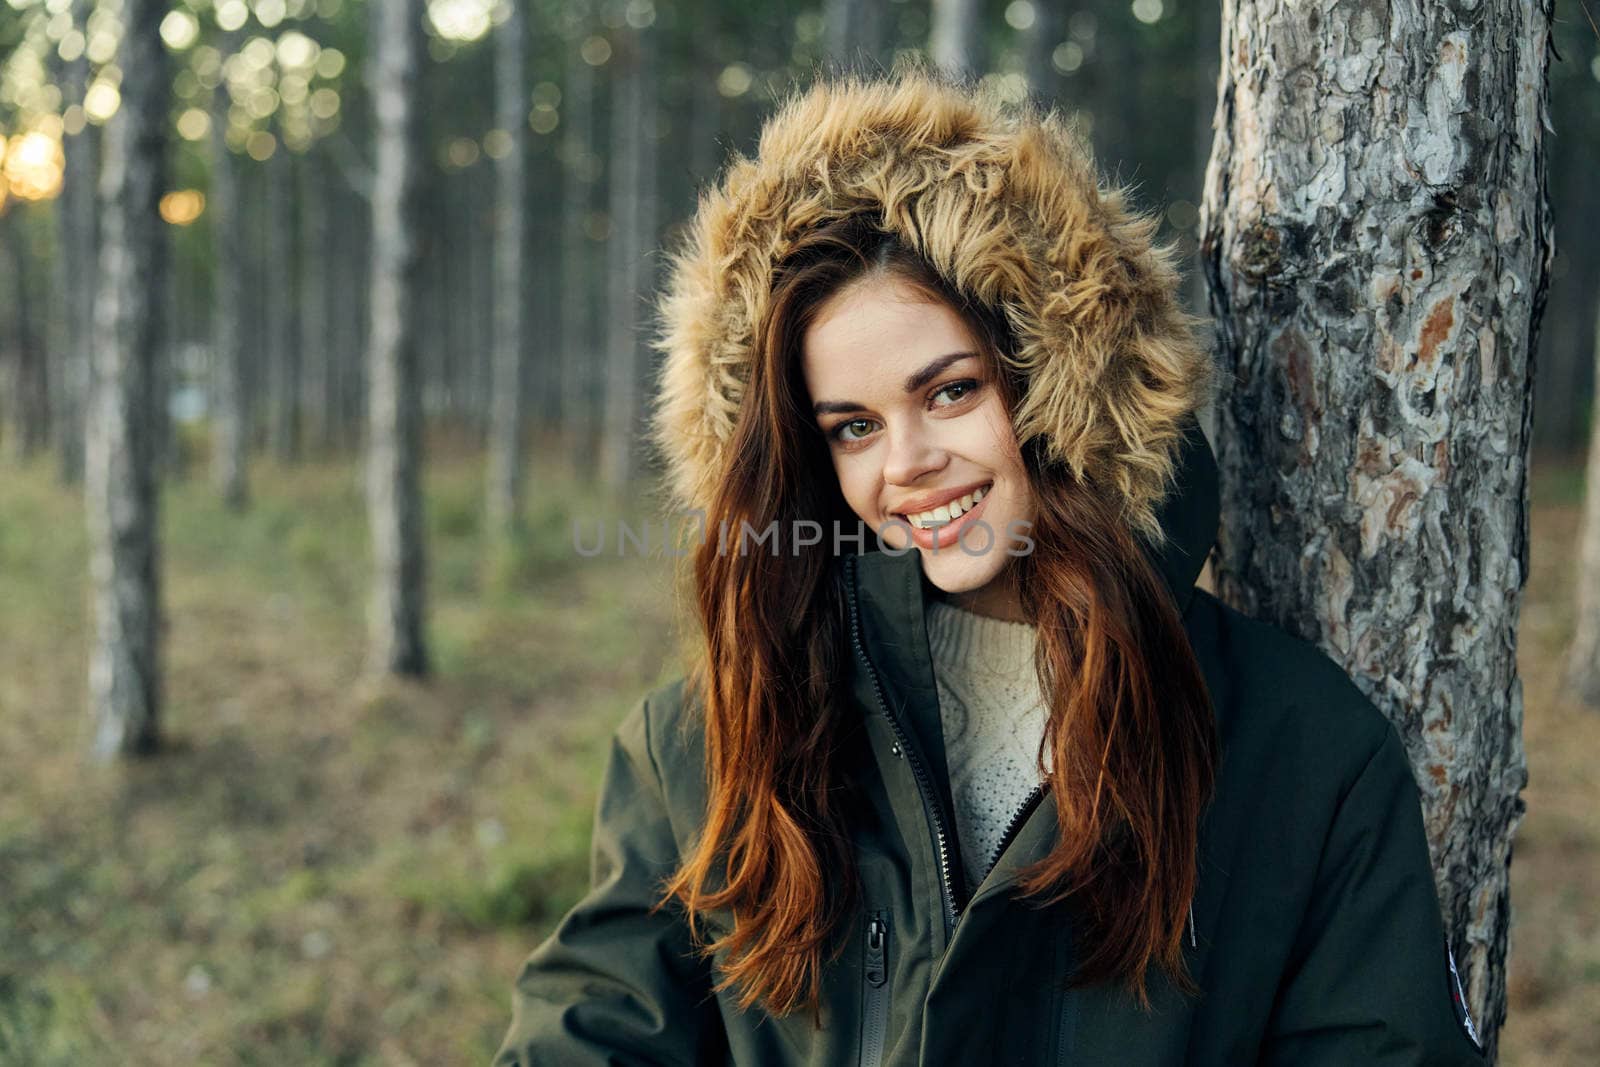 Smiling woman on nature tourism as a lifestyle near a tree. High quality photo